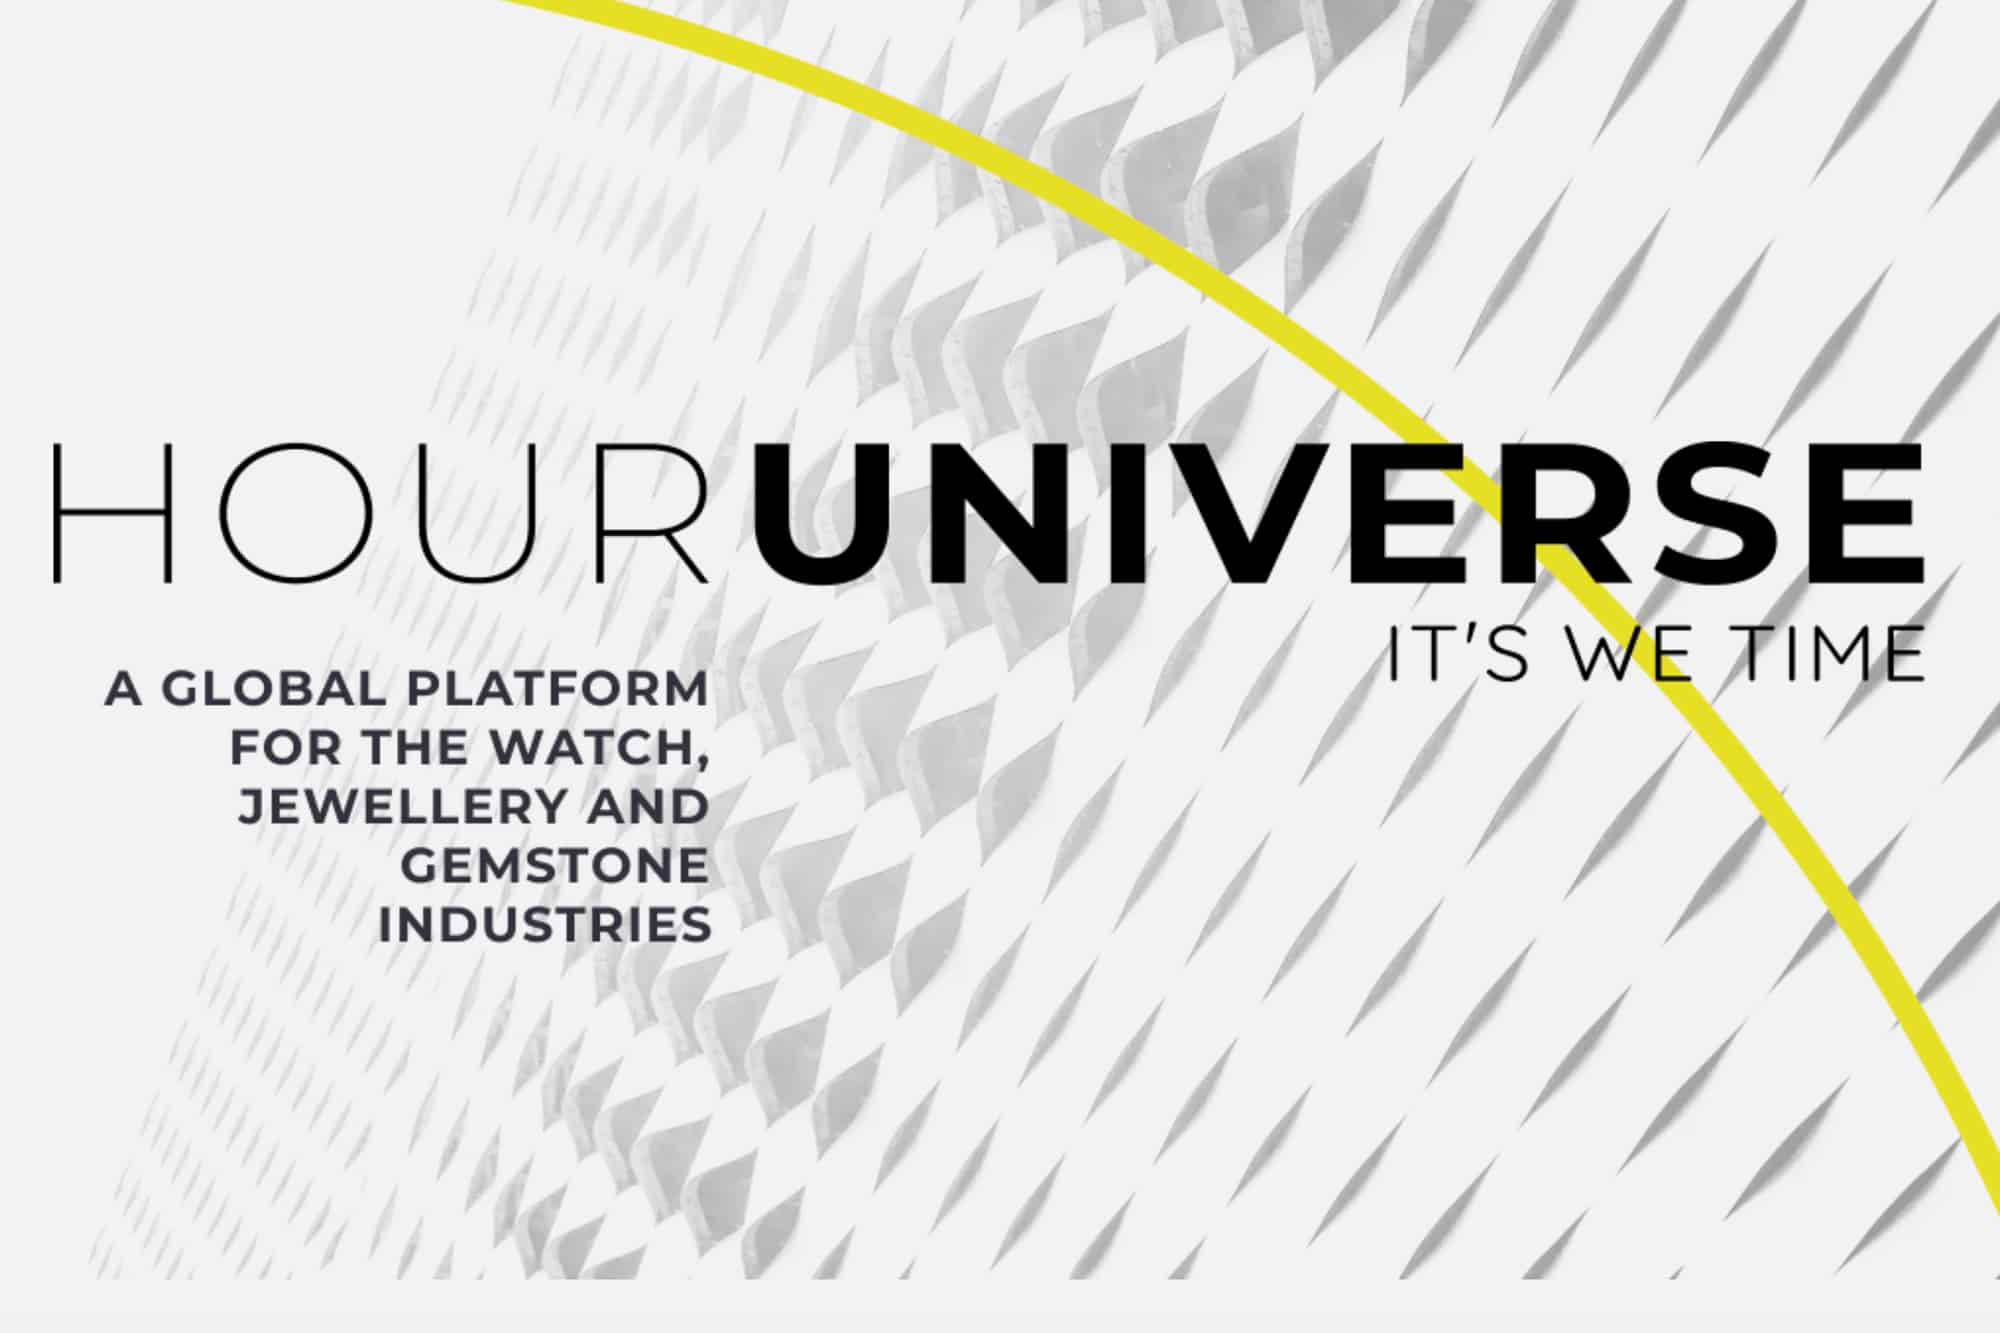 Breaking News: MCH Announces HourUniverse, the Apparent Successor to Baselworld